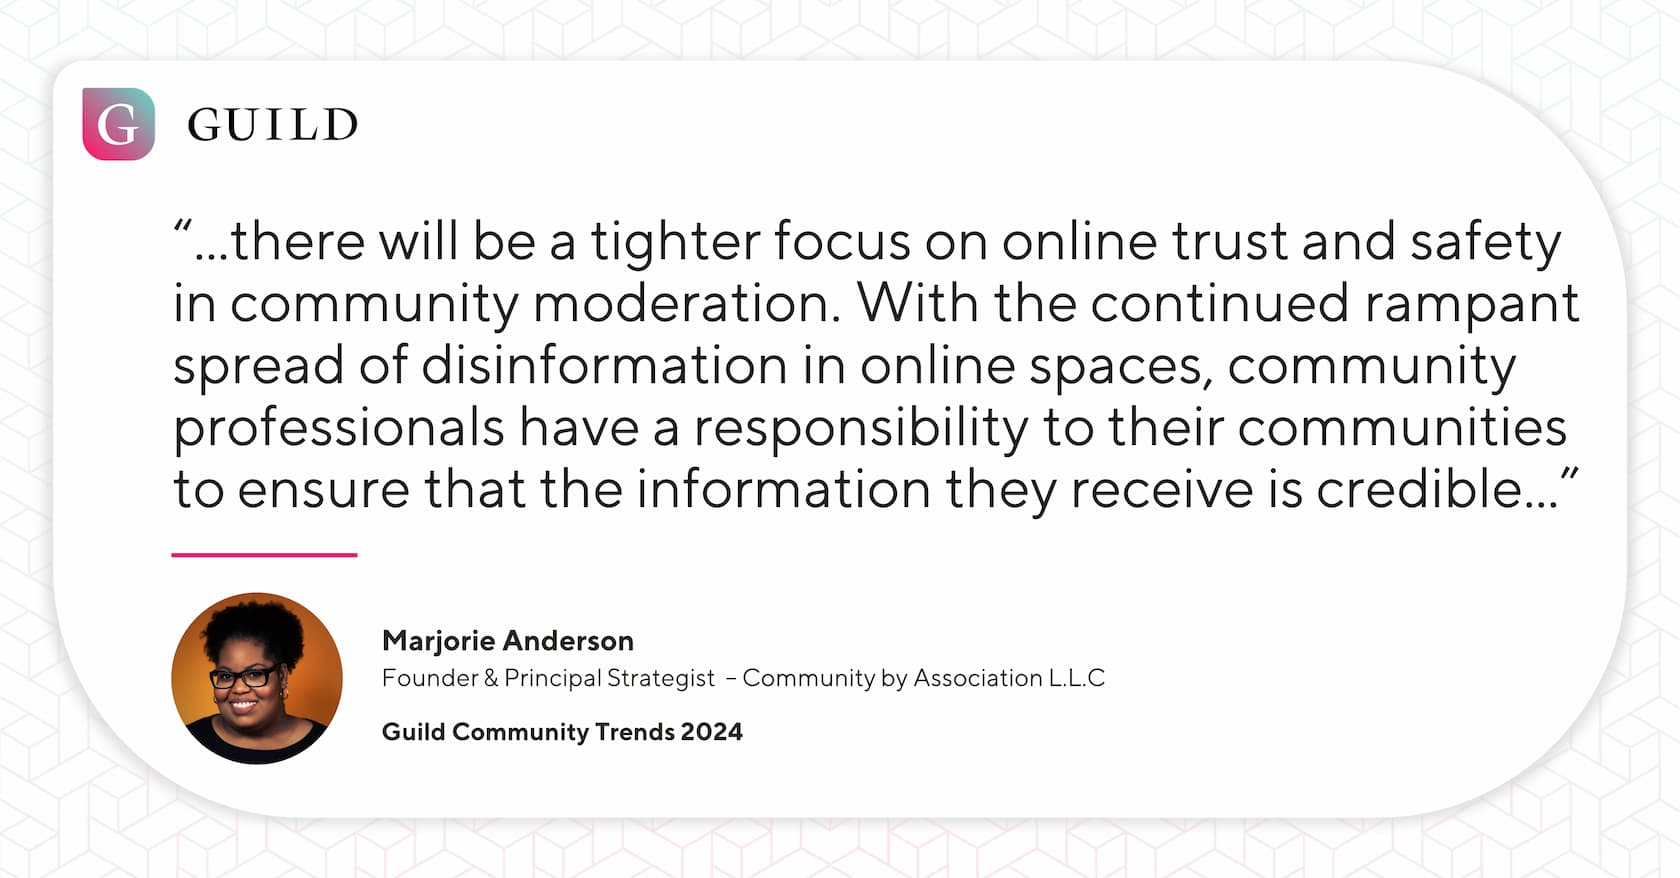 A quote from Marjorie Anderson reading “...there will be a tighter focus on online trust and safety in community moderation. With the continued rampant spread of disinformation in online spaces, community professionals have a responsibility to their communities to ensure that the information they receive is credible...”